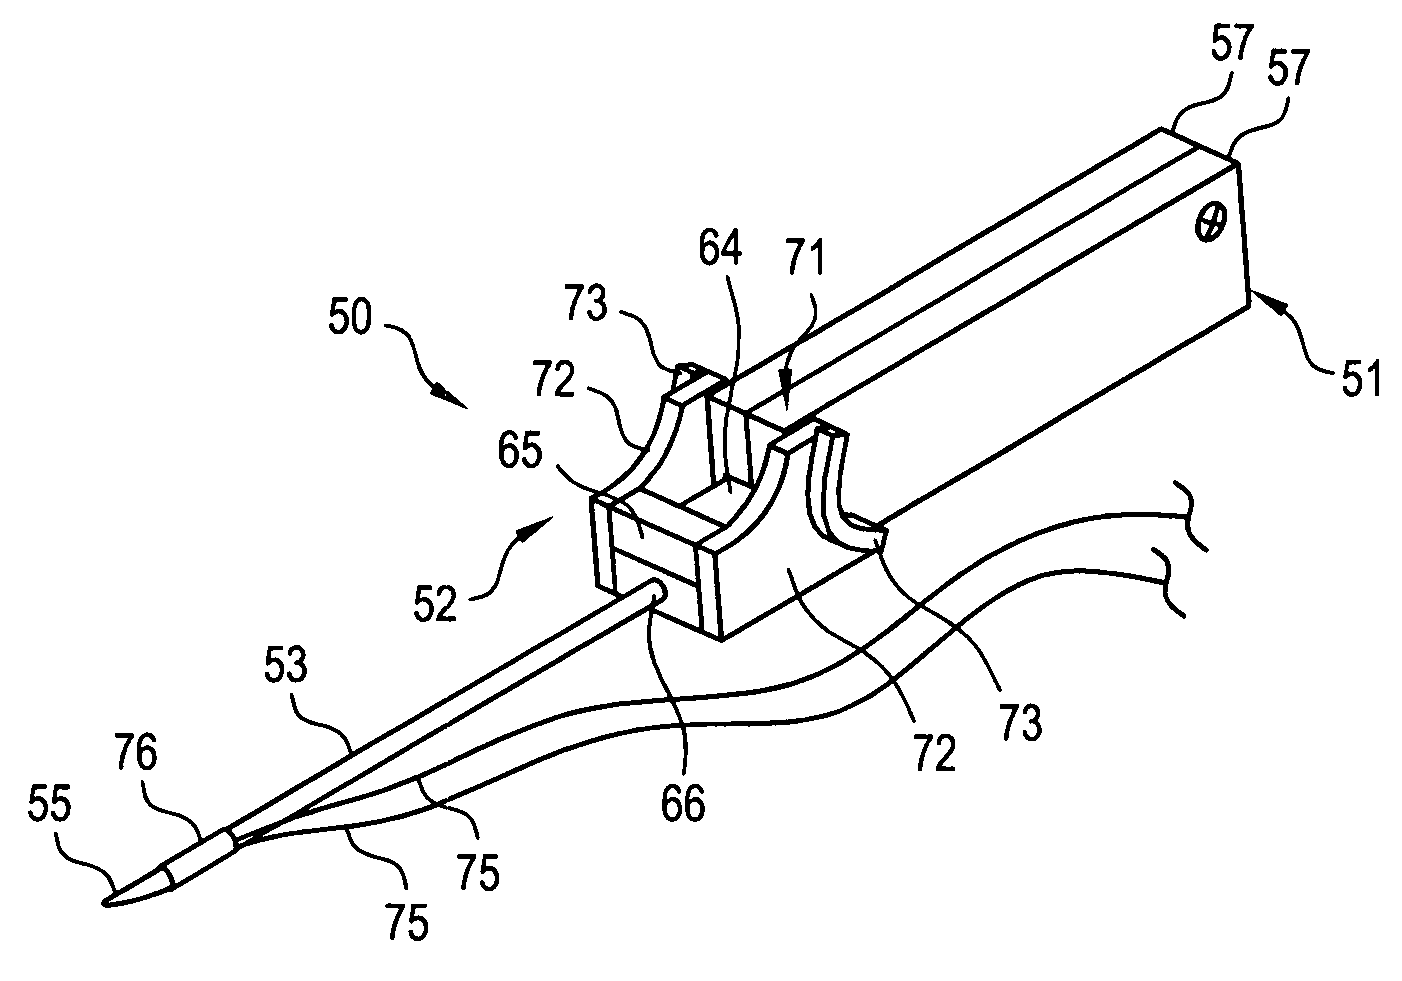 Surgical suturing device, method and tools used therewith